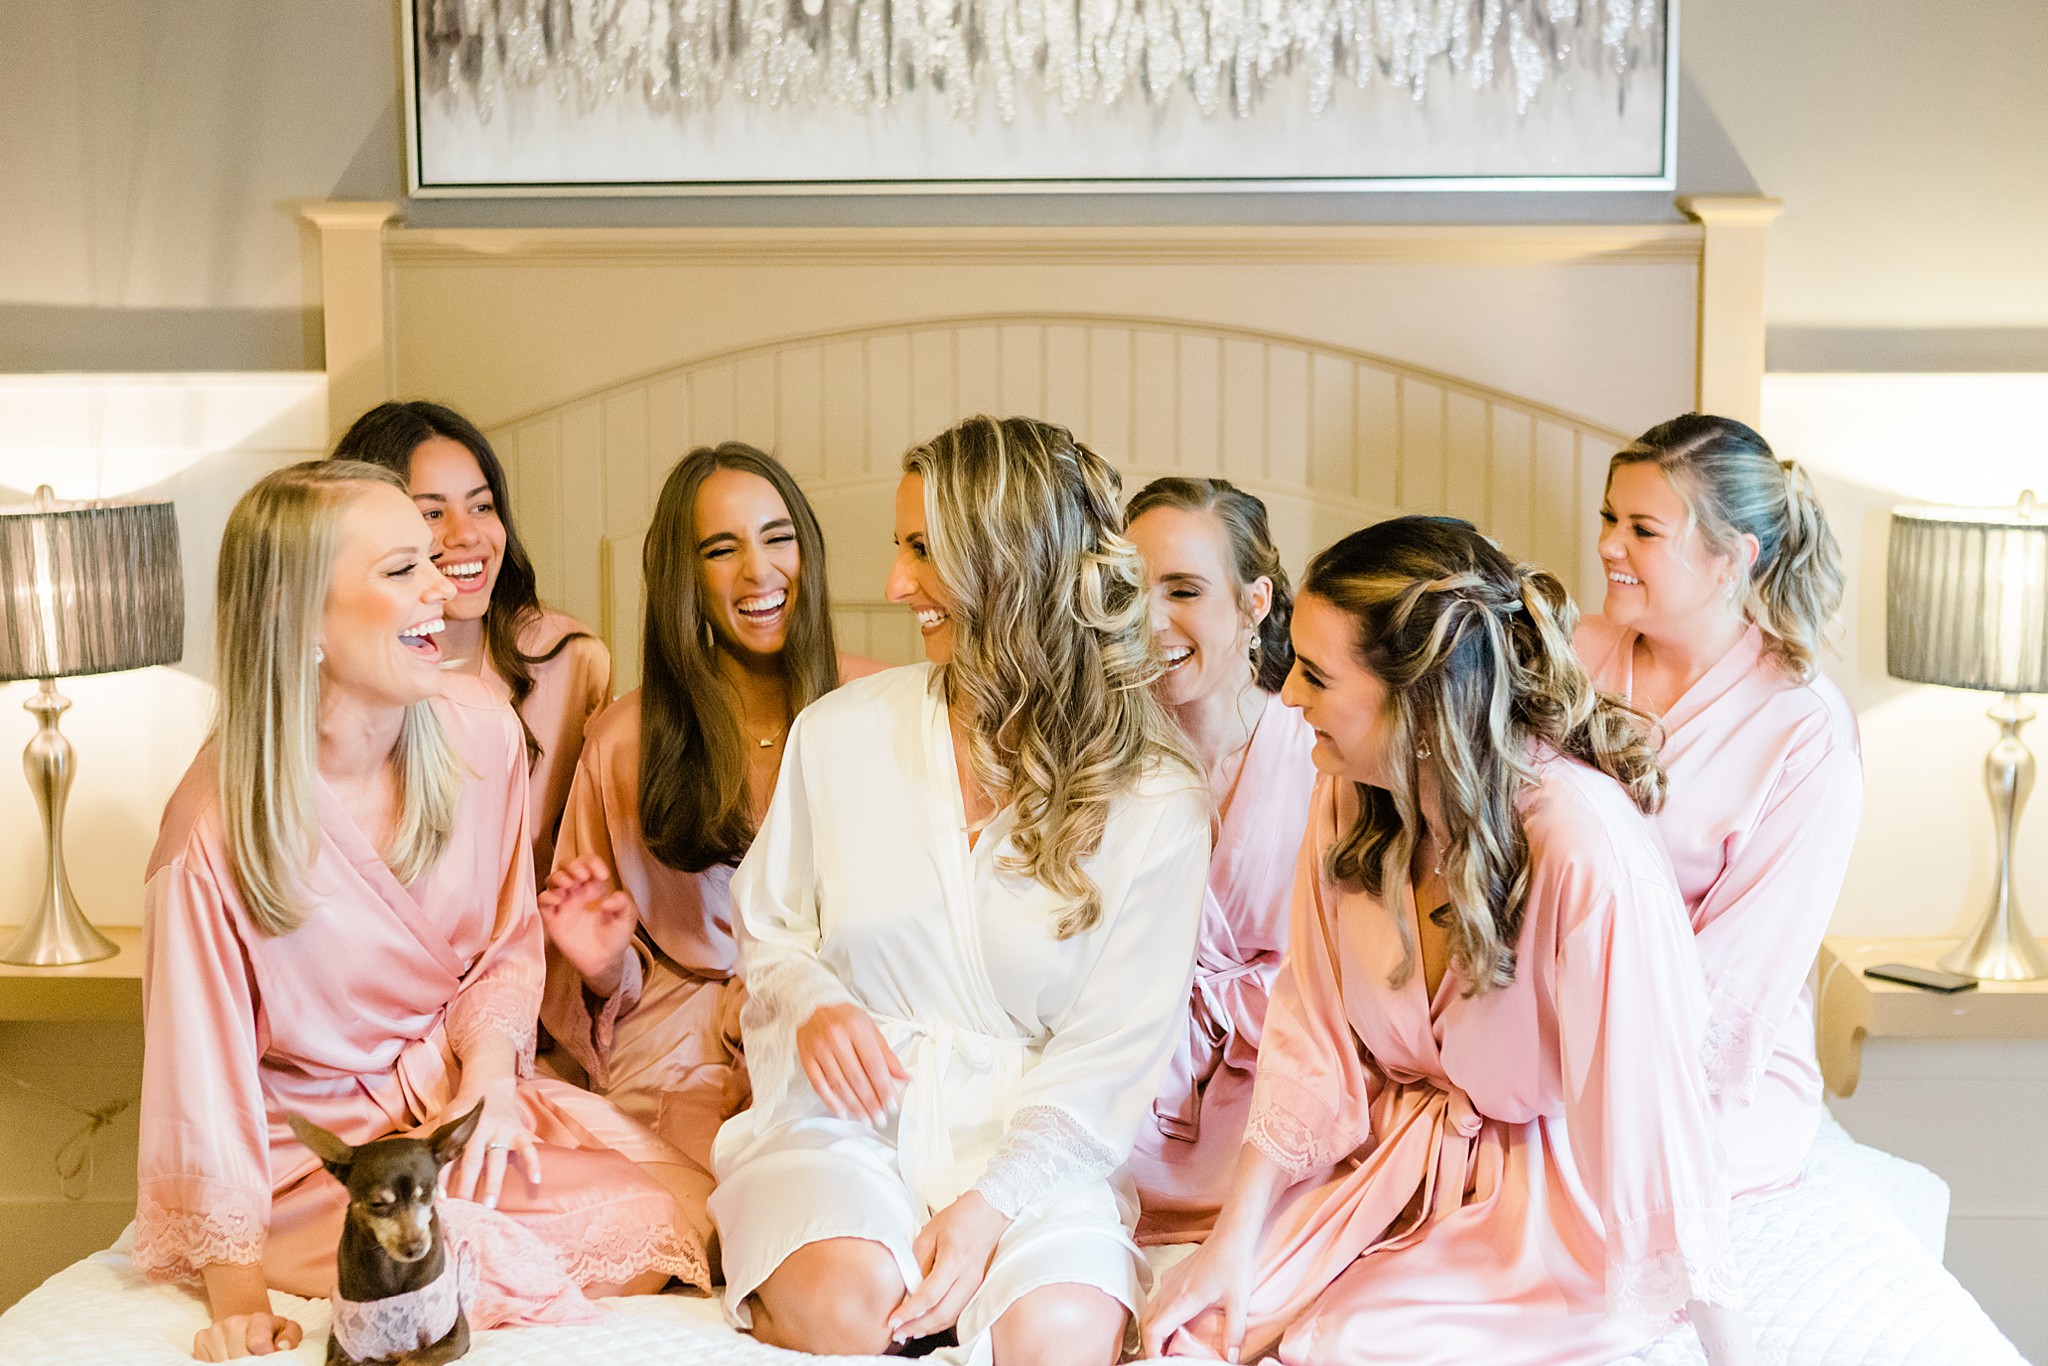 Pack some prep attire Bride sitting on bed with bridesmaids dahlonega wedding photographer weekly Wednesday wedding tip